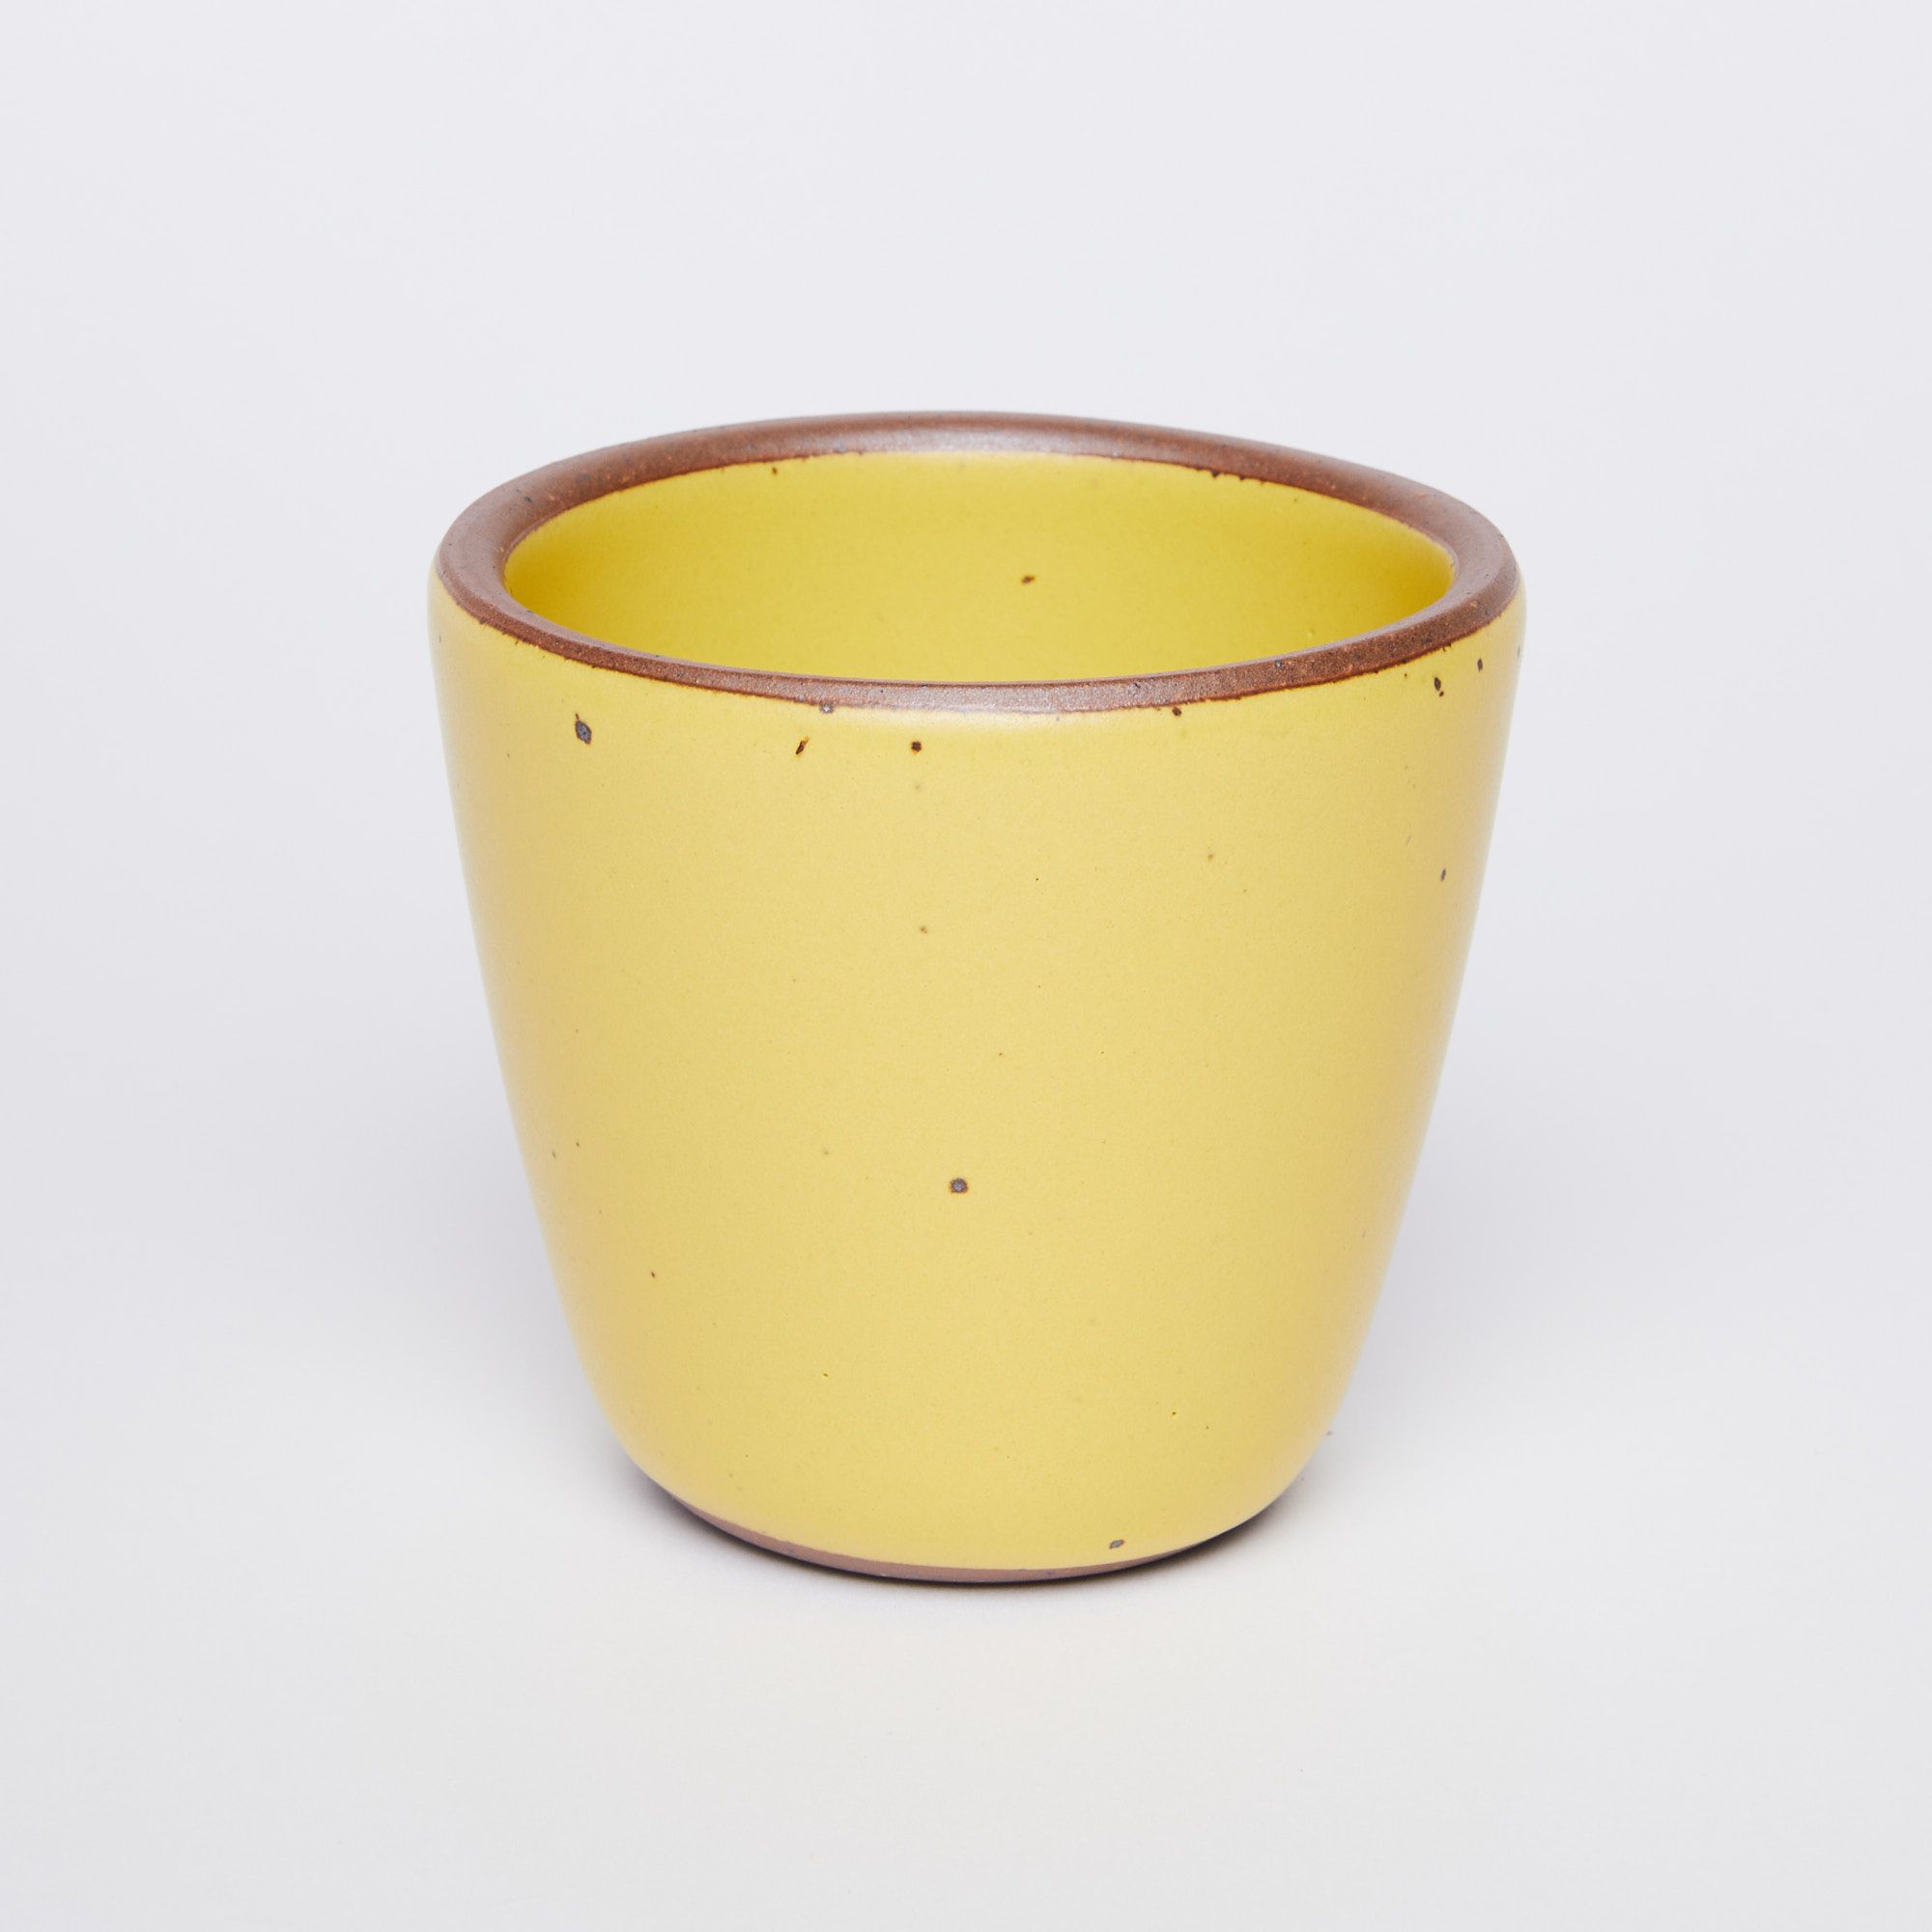 short cup that tapers out to get wider at the top in Pollen (yellow) glaze